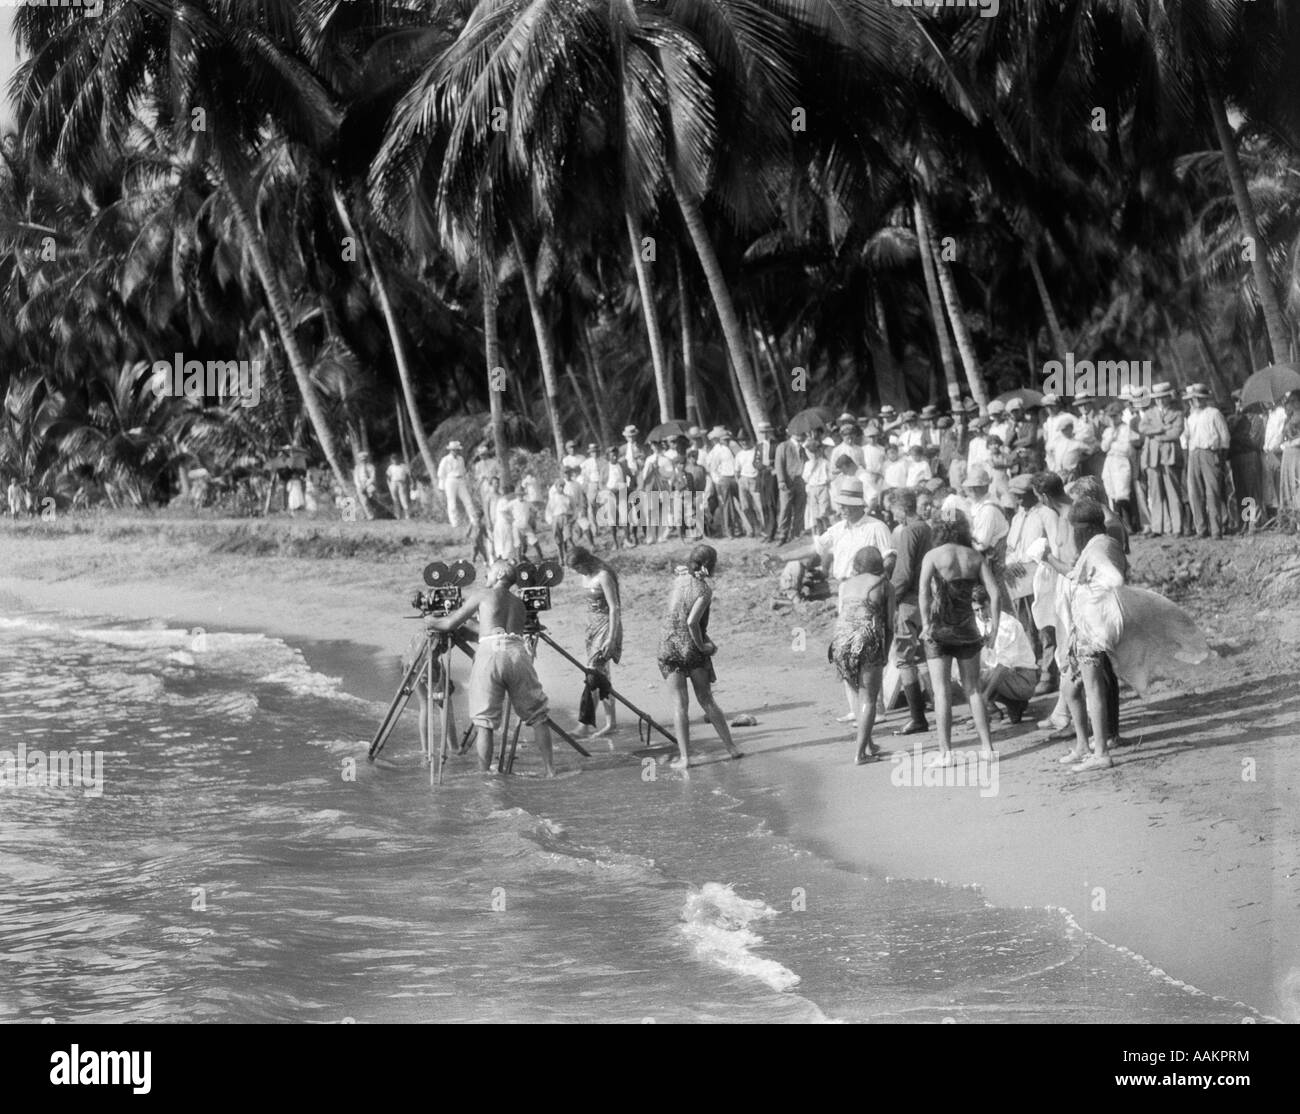 1920s MOVIE CREW WITH CAMERAS ON TRIPODS IN SURF ON TROPICAL BEACH Stock Photo